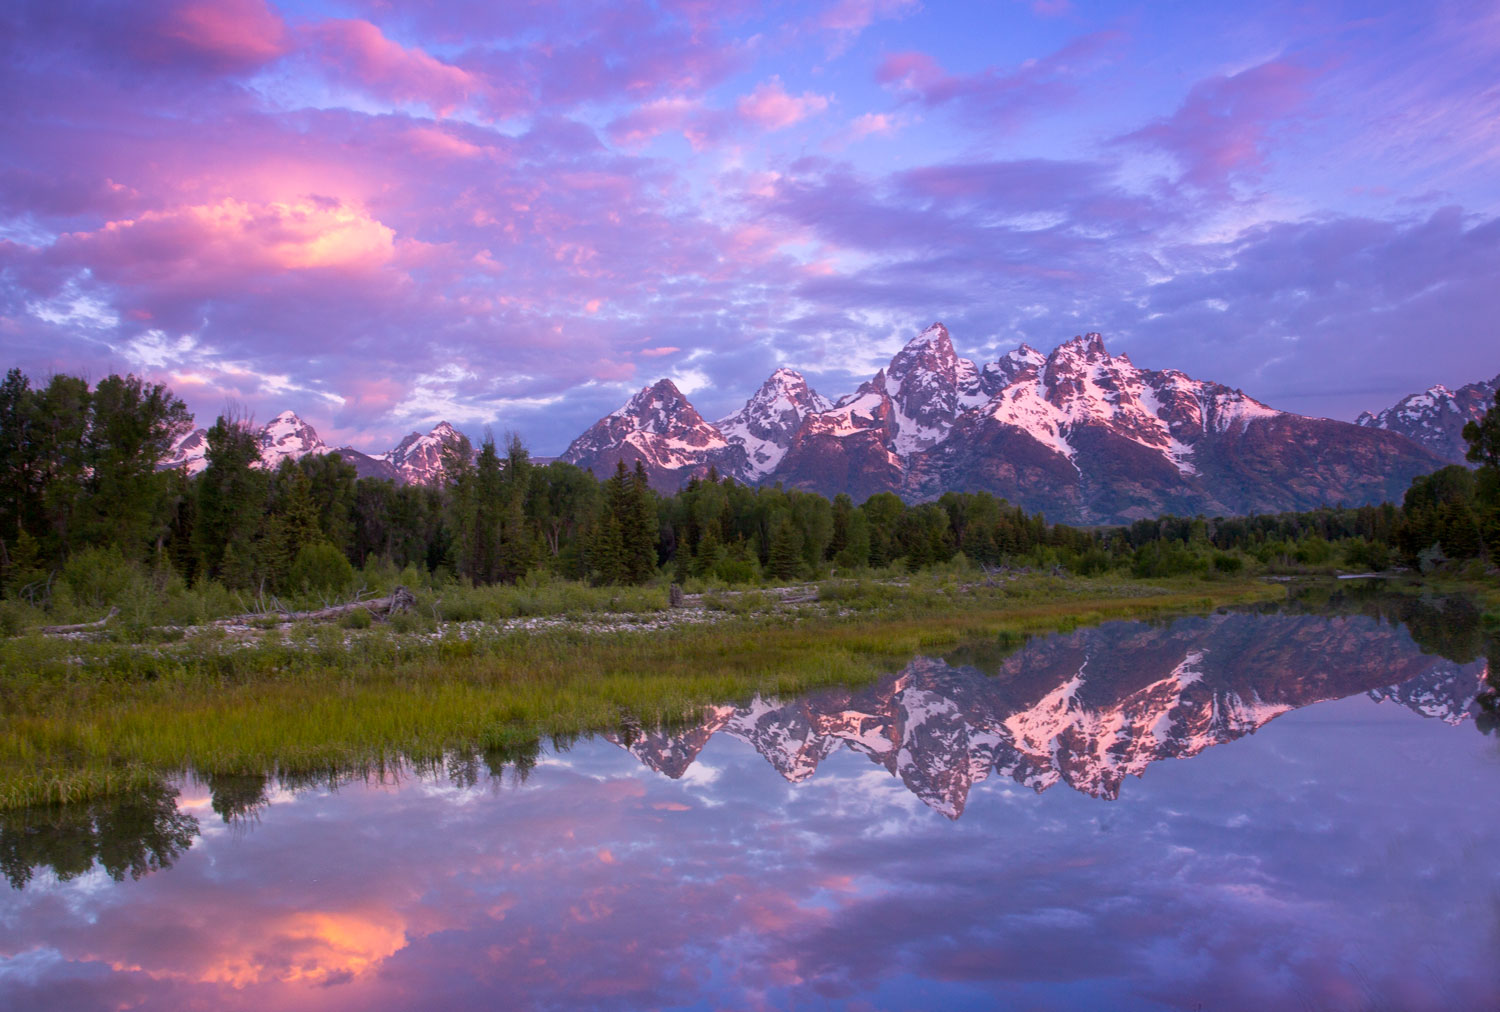 One of my favorite images, Schwabacher's Landing in a beautiful sunrise that paints the sky and reflecting waters all shades...